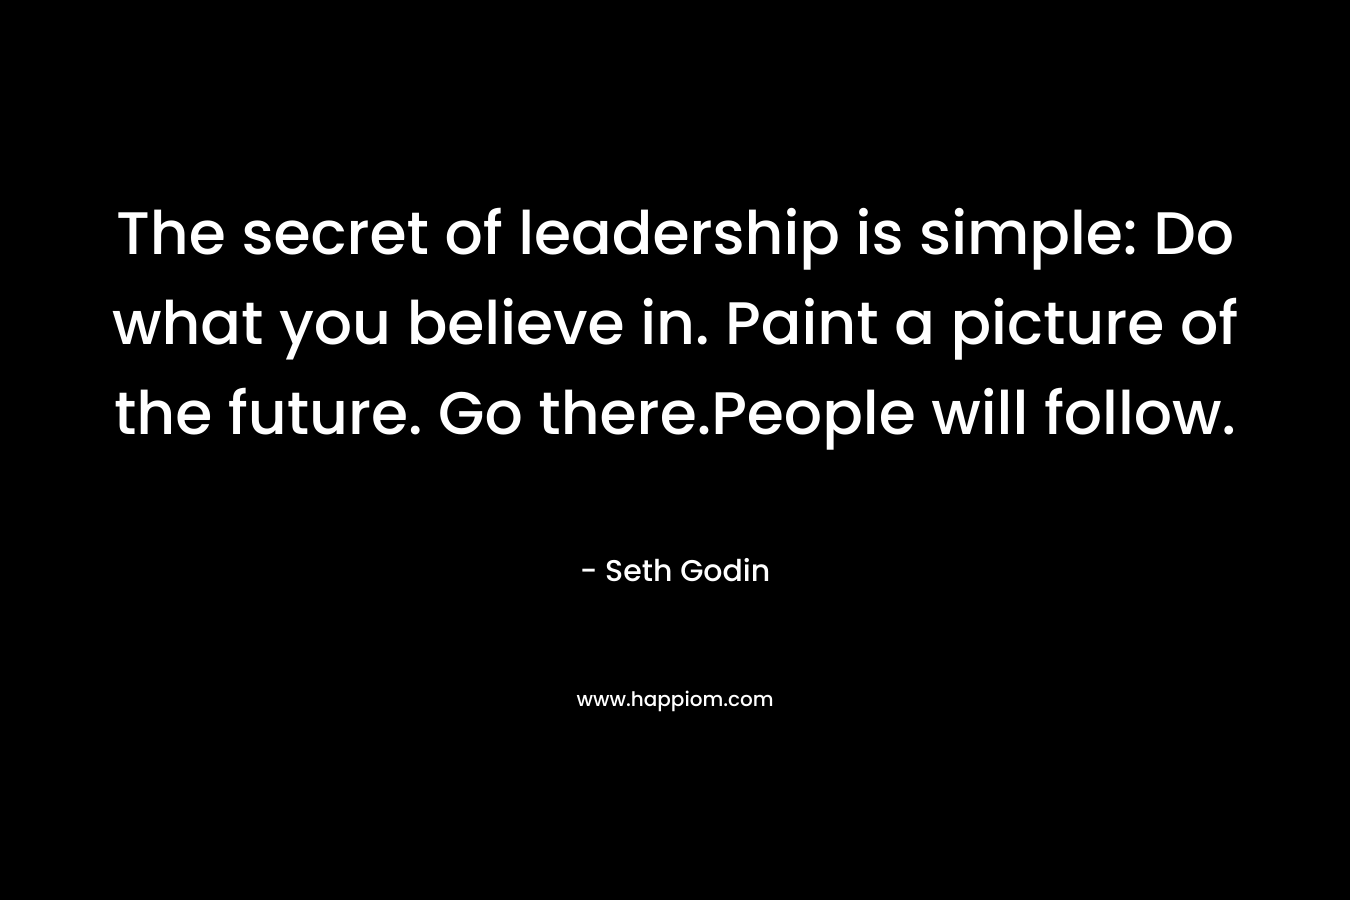 The secret of leadership is simple: Do what you believe in. Paint a picture of the future. Go there.People will follow. – Seth Godin